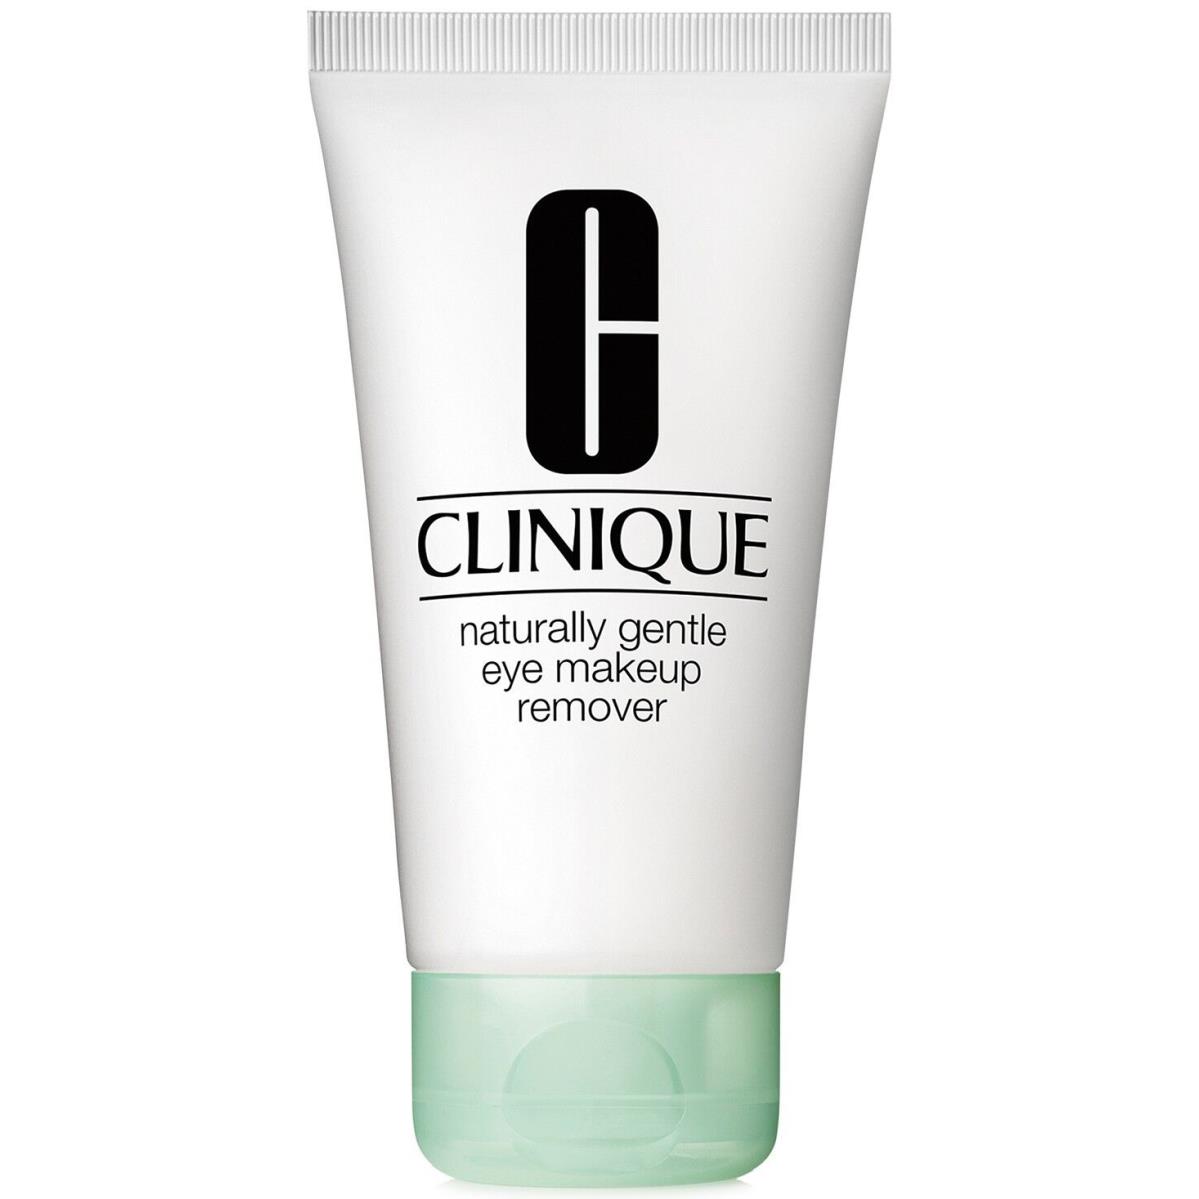 Clinique Naturally Gentle Eye Makeup Remover 2.5 oz/75 ml Version Full Size